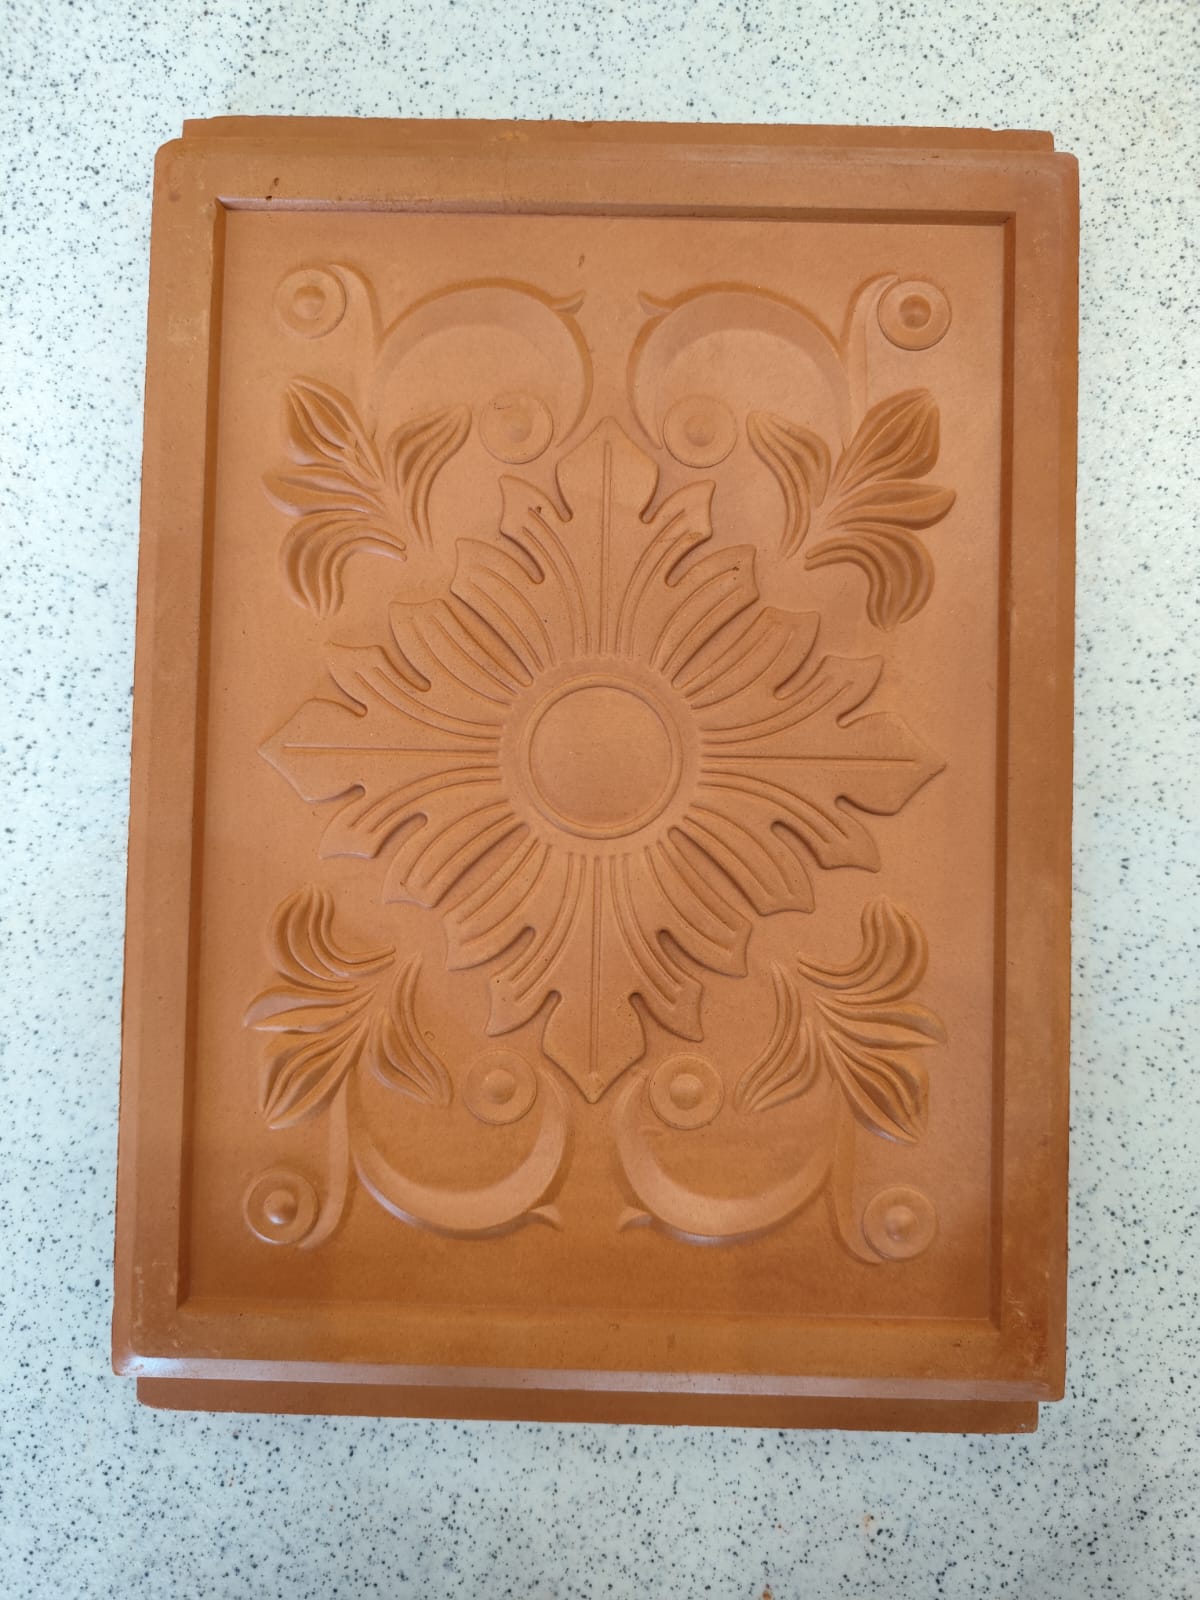 ceiling-flower-clay-tile-12585